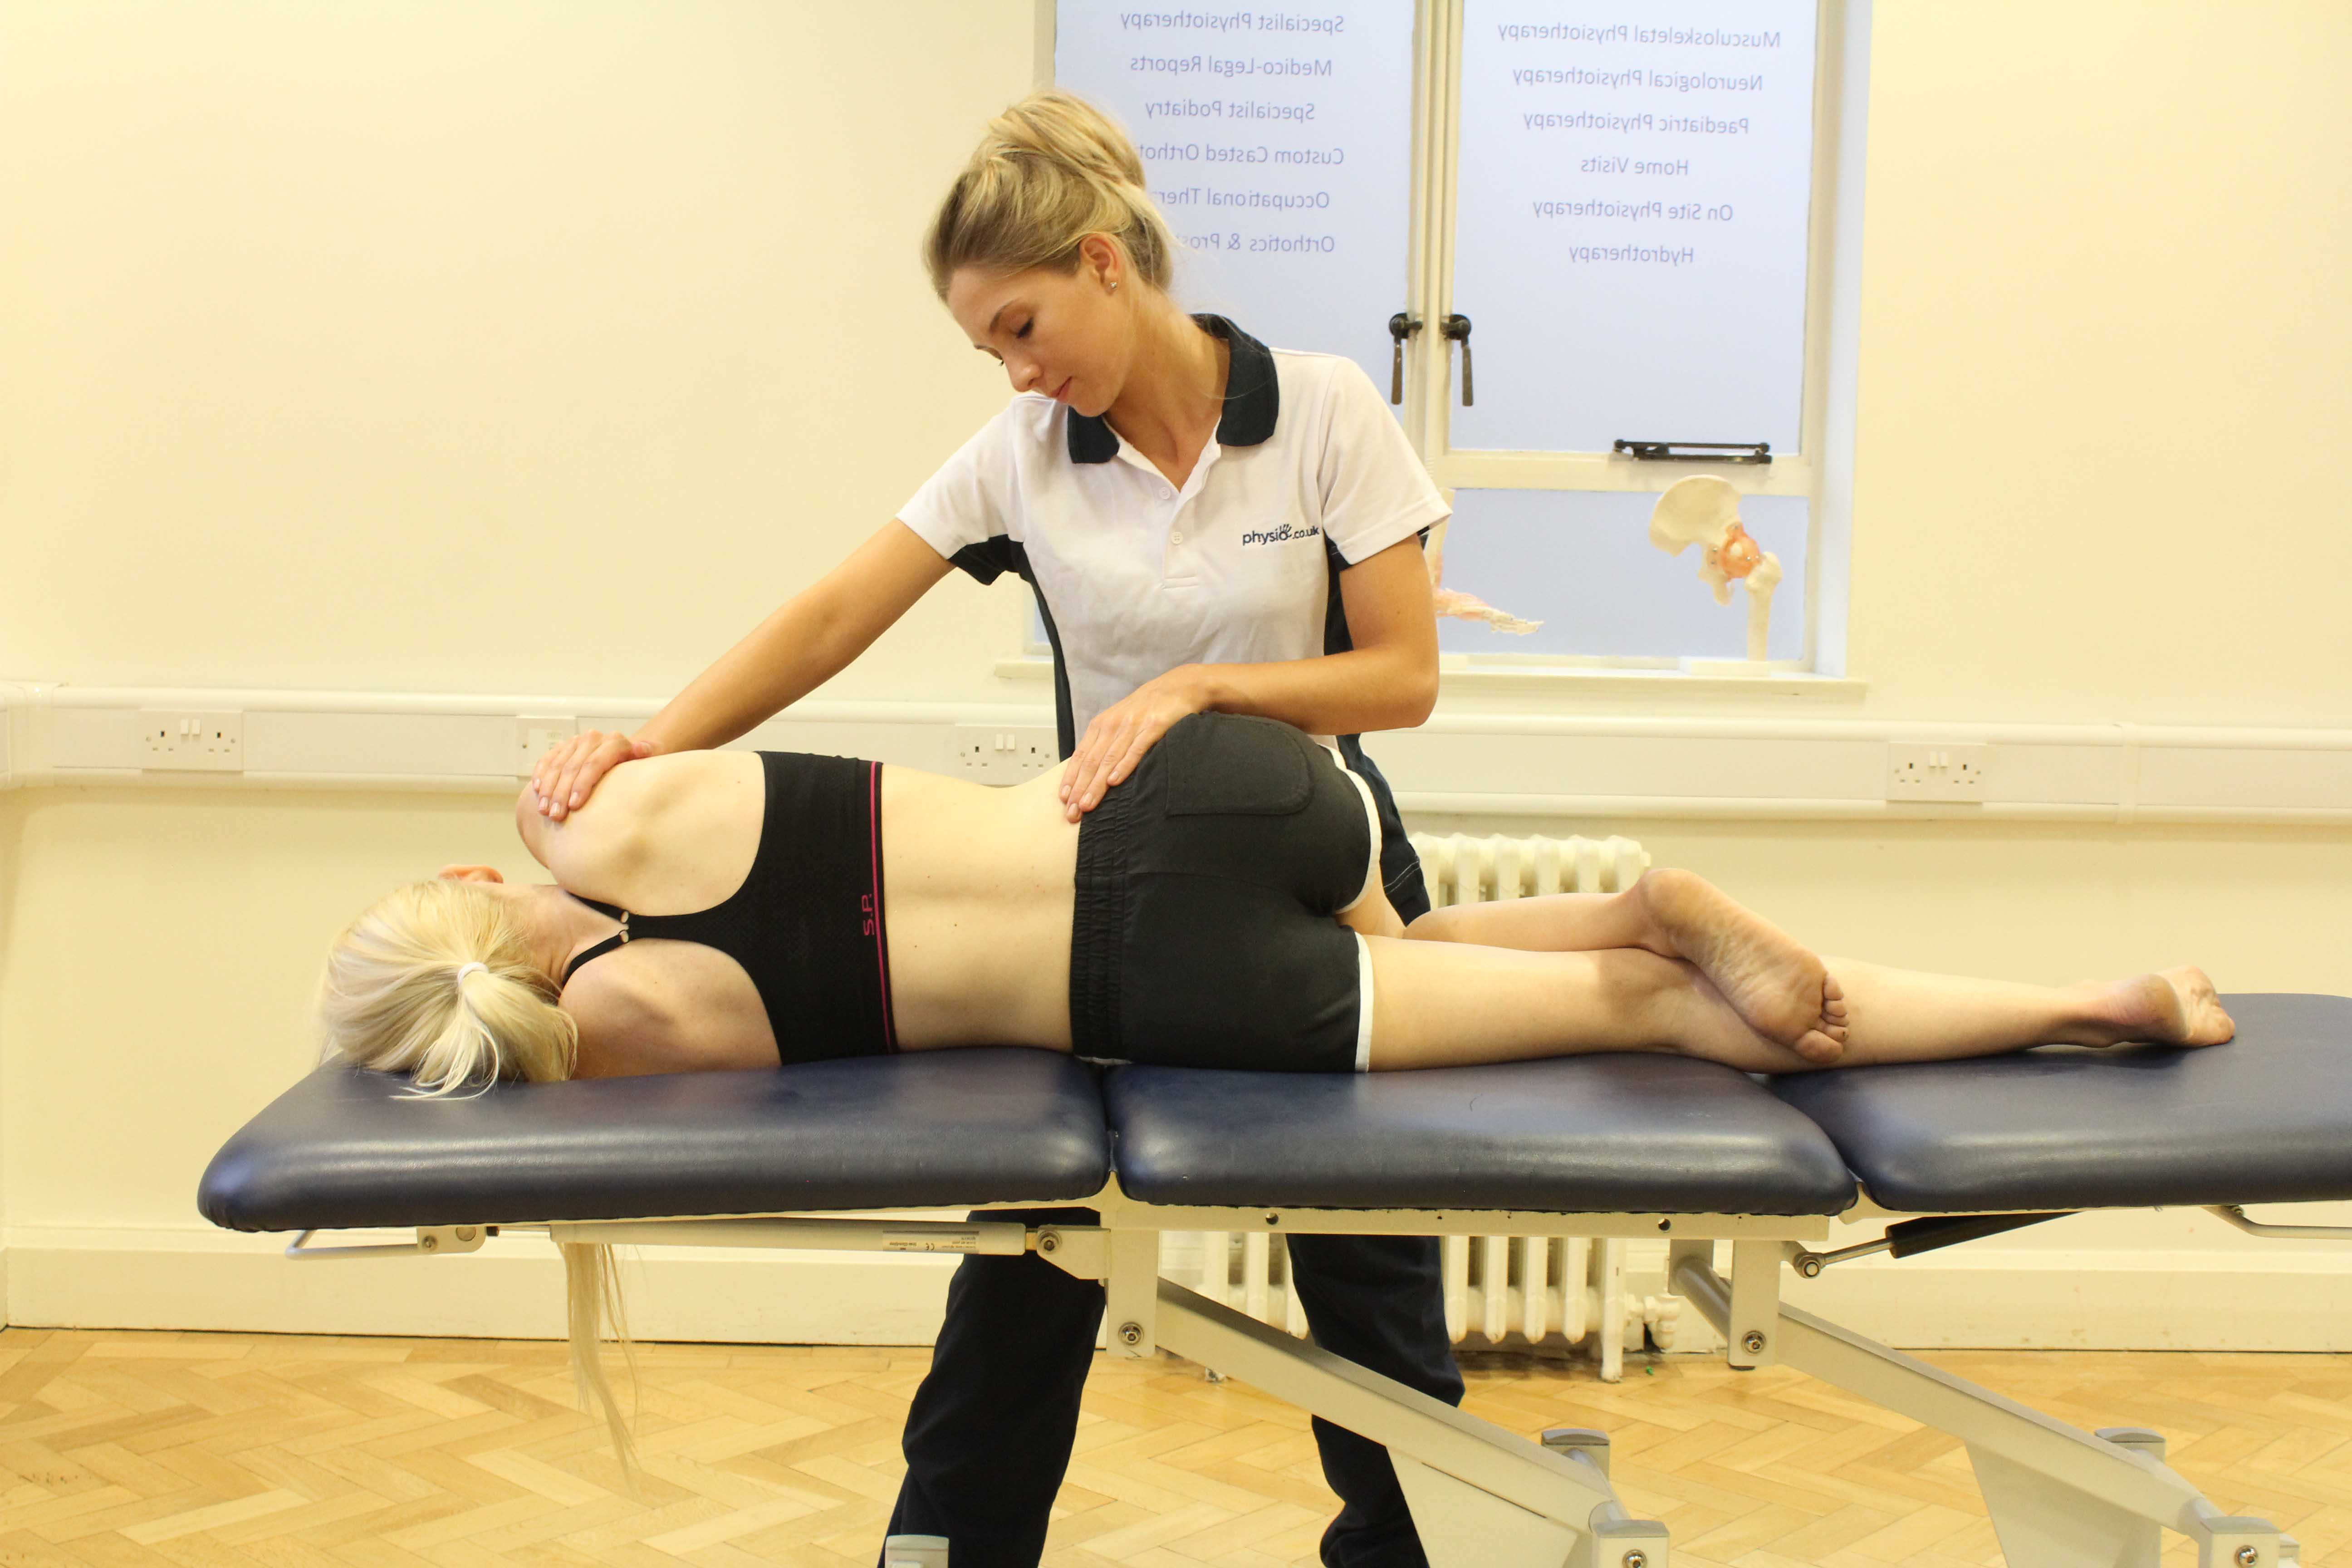 Massage and mobilisations of the arm and shoulder by a specilaist massage therapist